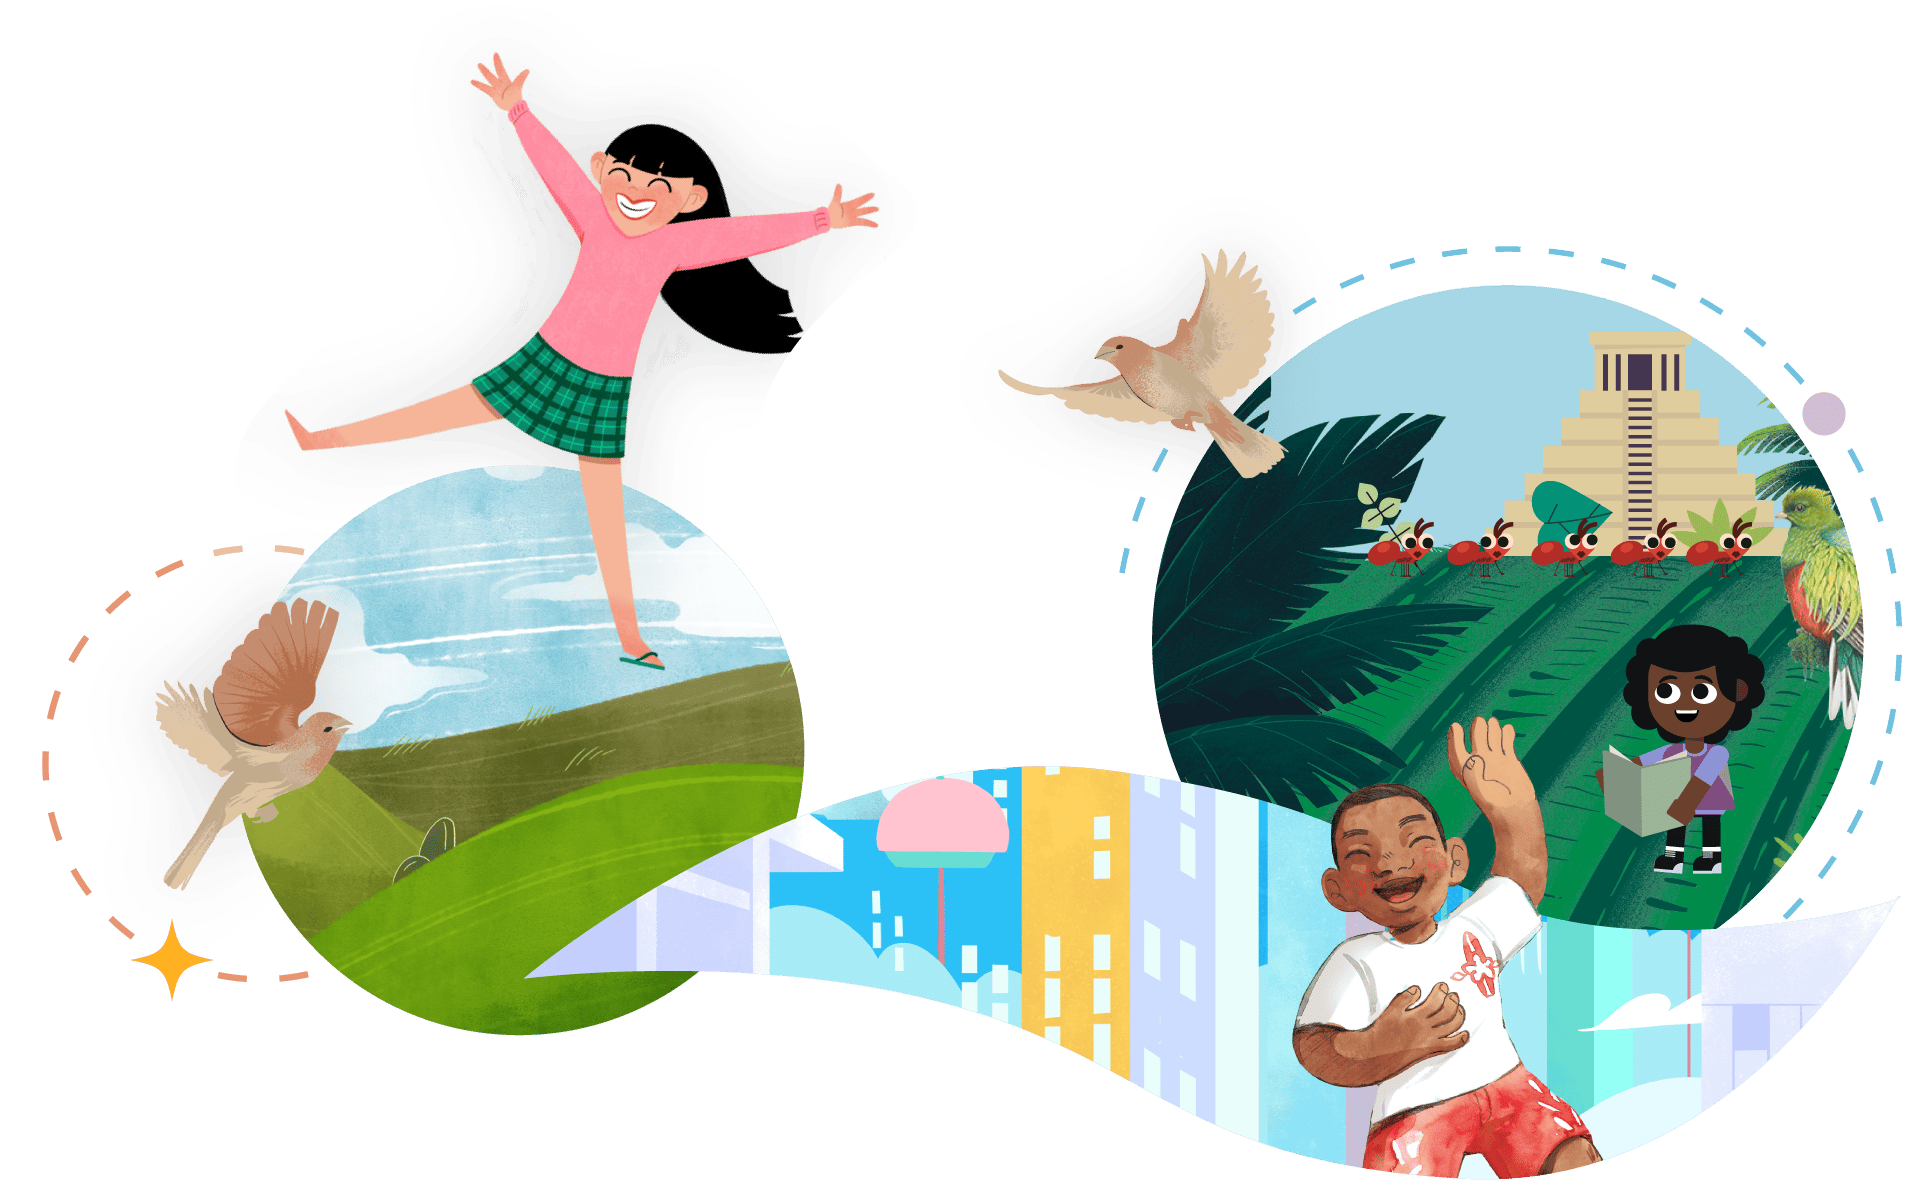 Illustration showing three scenes of joy: a girl extending arms in nature with birds, a boy painting with a woman in a city demonstrating CKLA methods, and colorful houses on a tropical hill